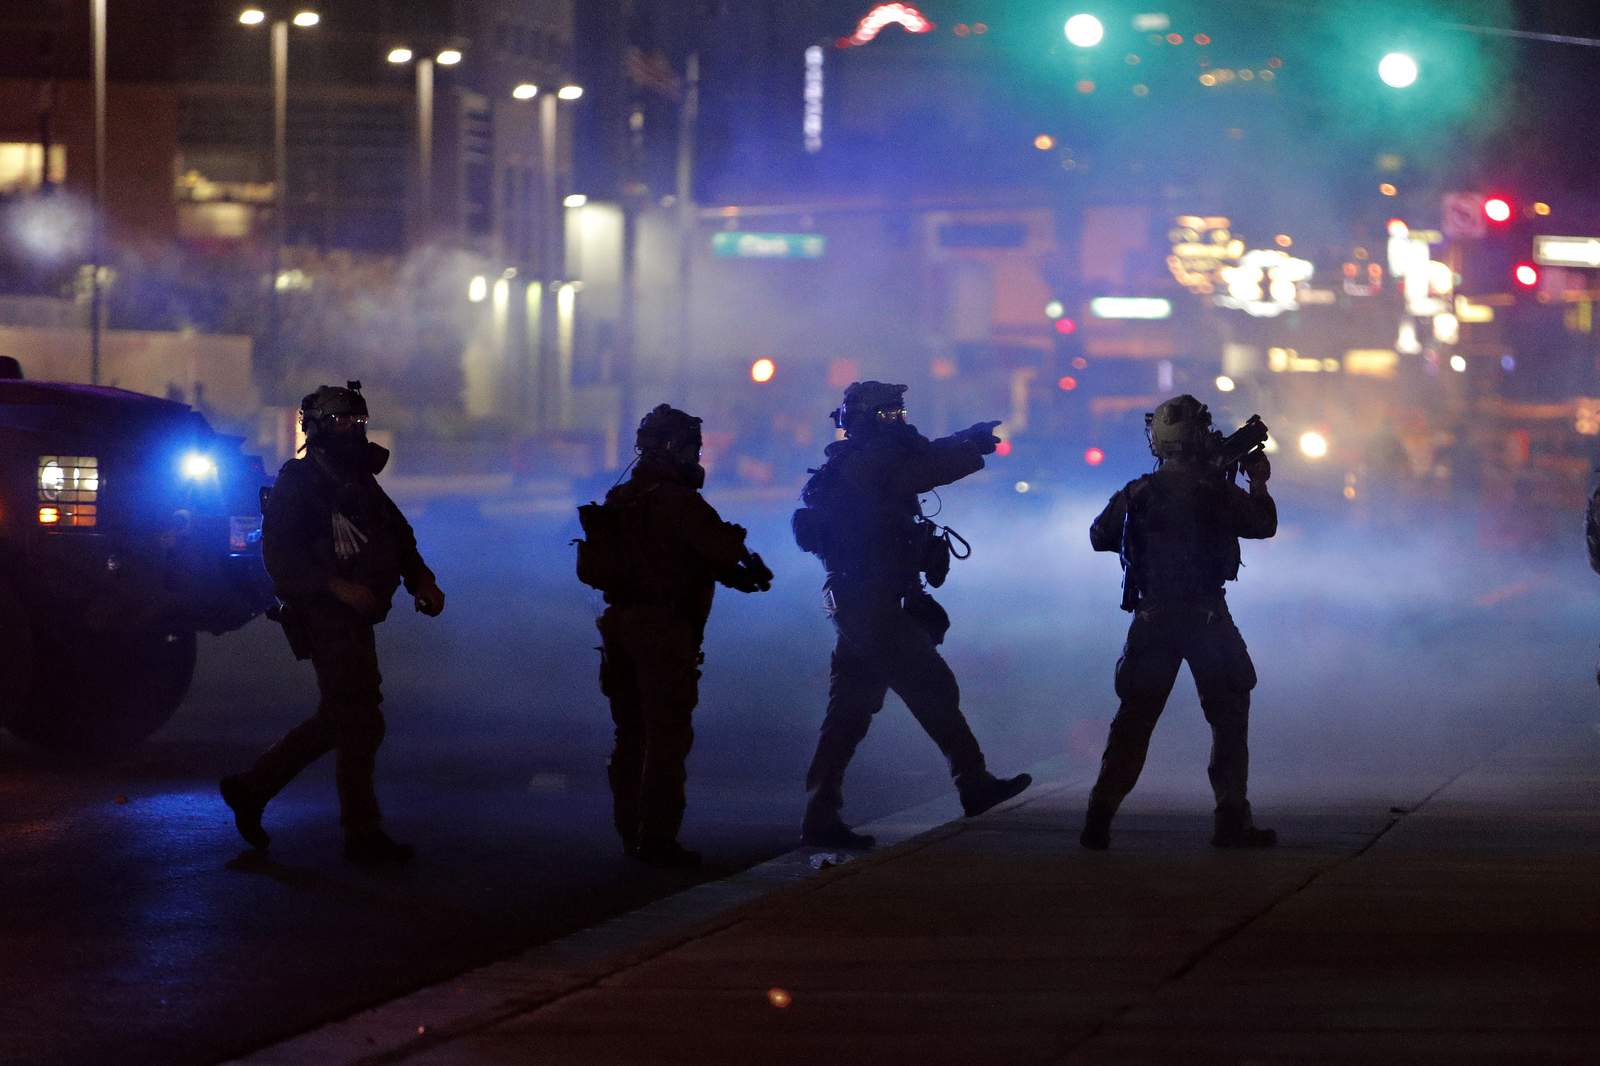 Videos show police turning up heat on protesters, rioters across US cities